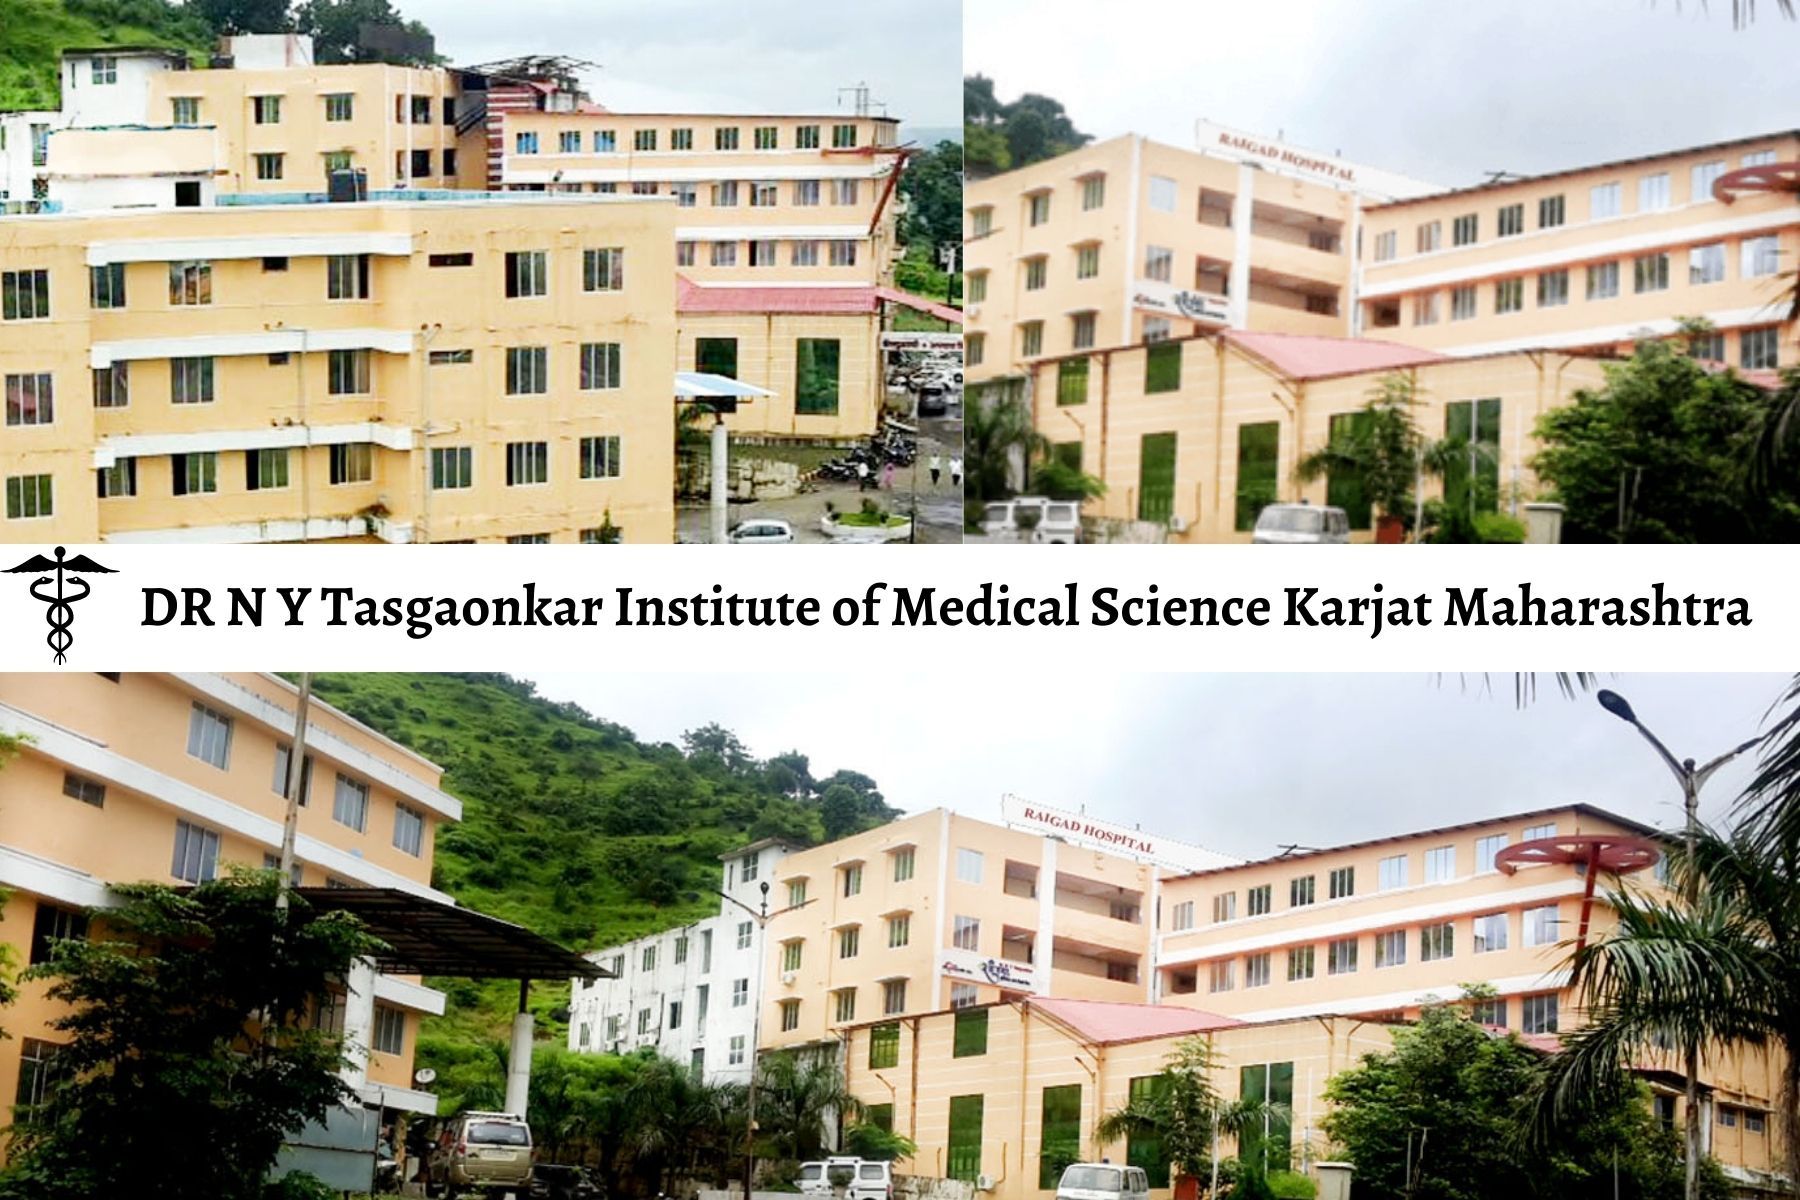 Dr N Y Tasgaonkar Institute of Medical Science Karjat 2022-23: Admission, Fees Structure, Course, Cutoff , Counselling , Contact Number